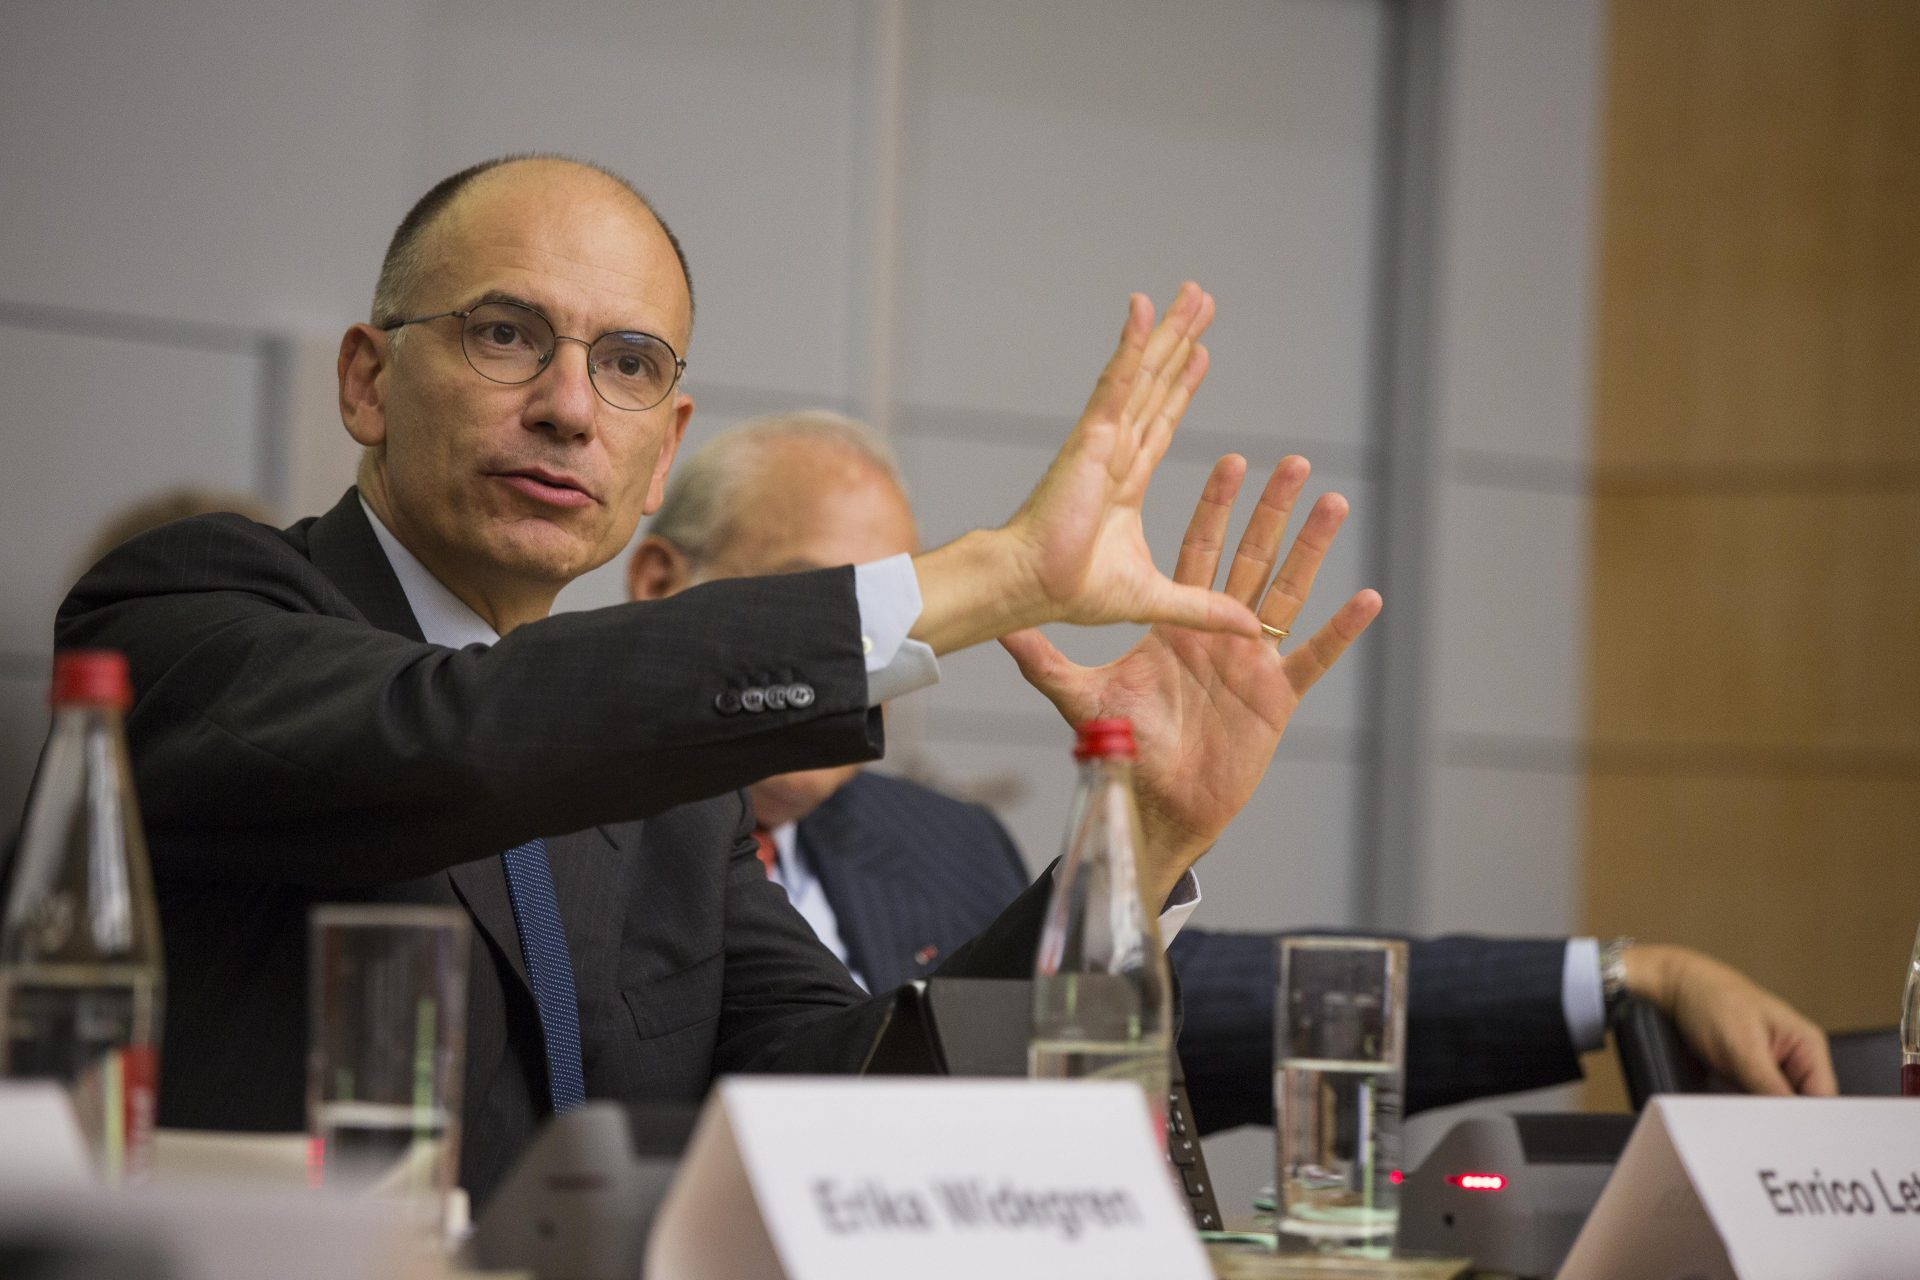 Enrico Letta speaking in the First annual meeting of Re-Imagine Europa at the OECD in Paris